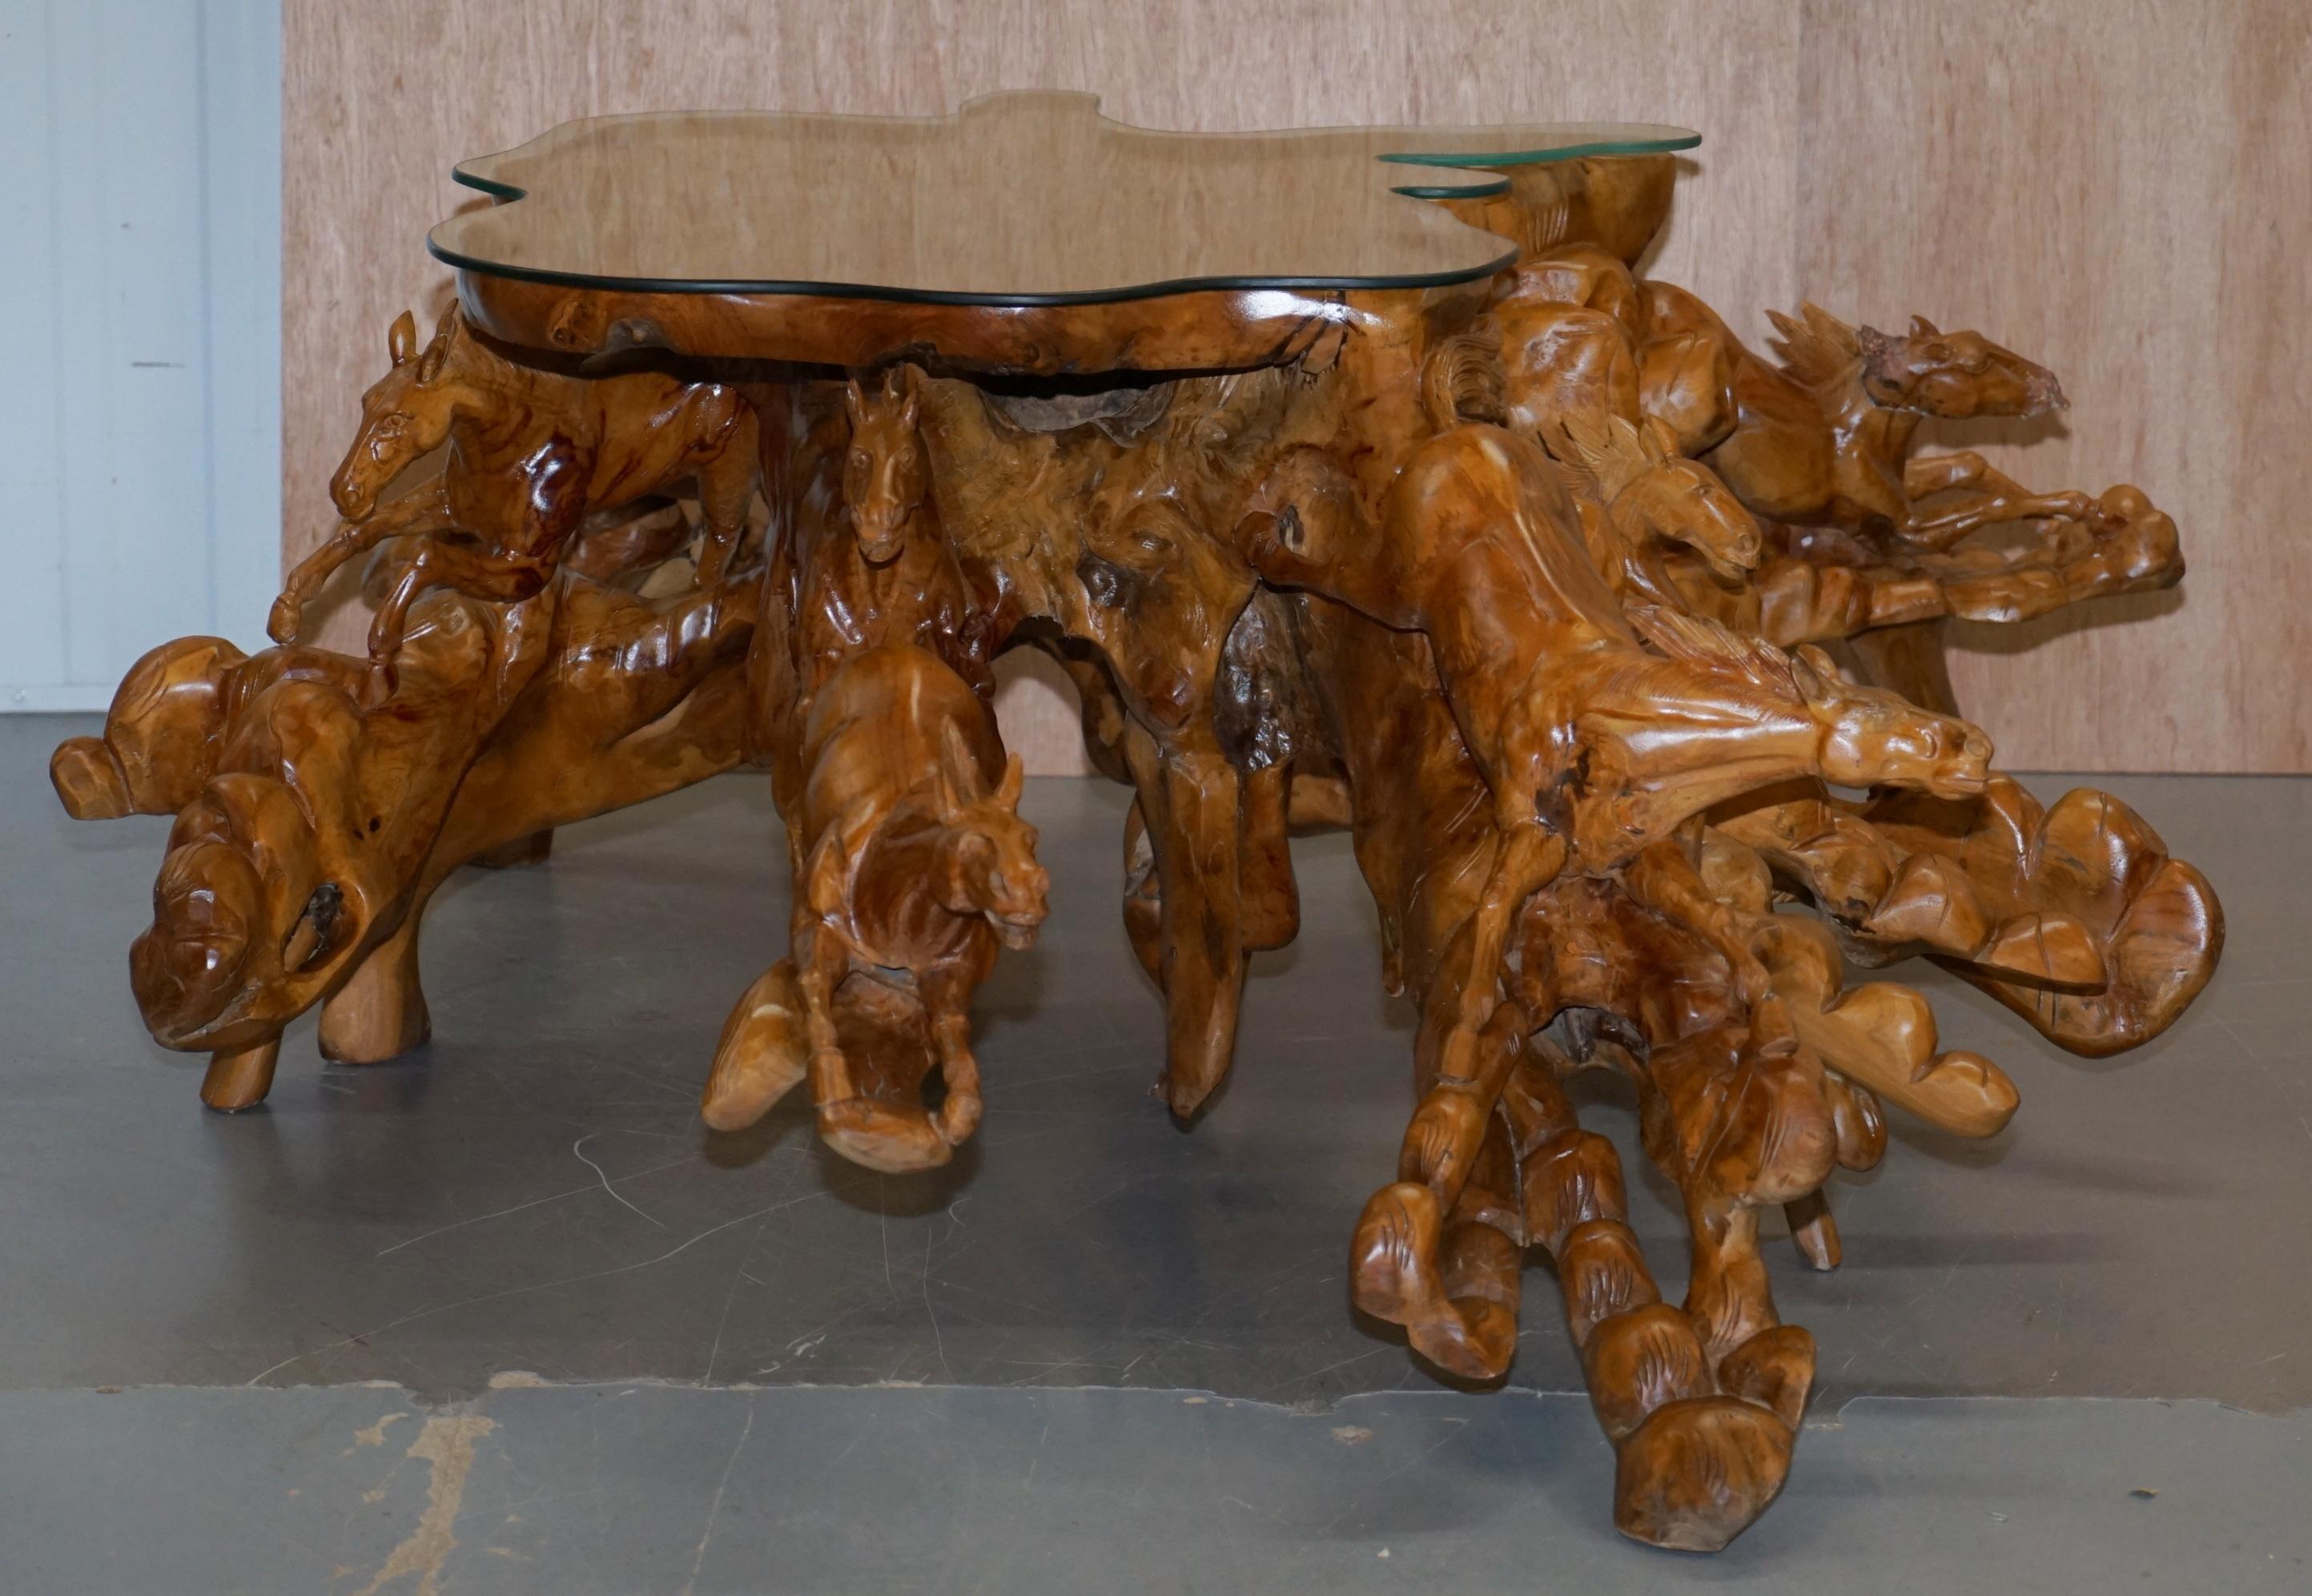 We are delighted to offer for sale this lovely one of a kind hand carved Equestrian Galloping Horse Root wood carved coffee table 

This table is part of a suite, I have two pairs of matching side tables listed under my other items

This is a